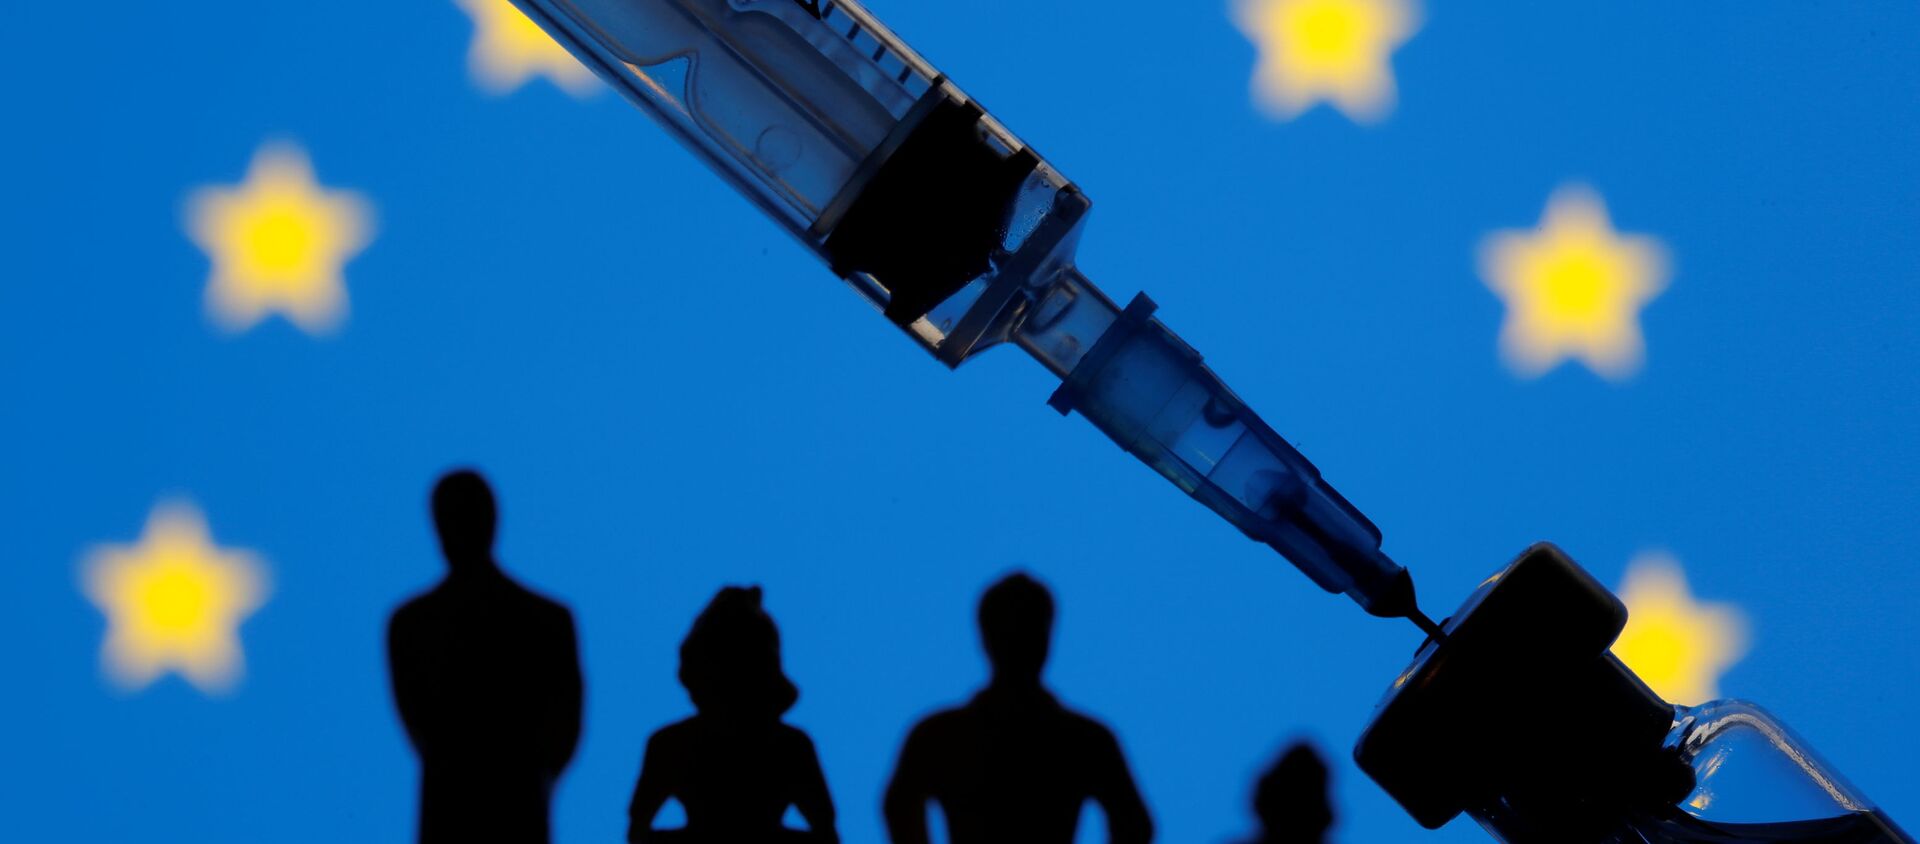 A vial, syringe and small toy figures are seen in front of a displayed EU flag in this illustration, taken 11 January 2021.  - Sputnik International, 1920, 24.02.2021